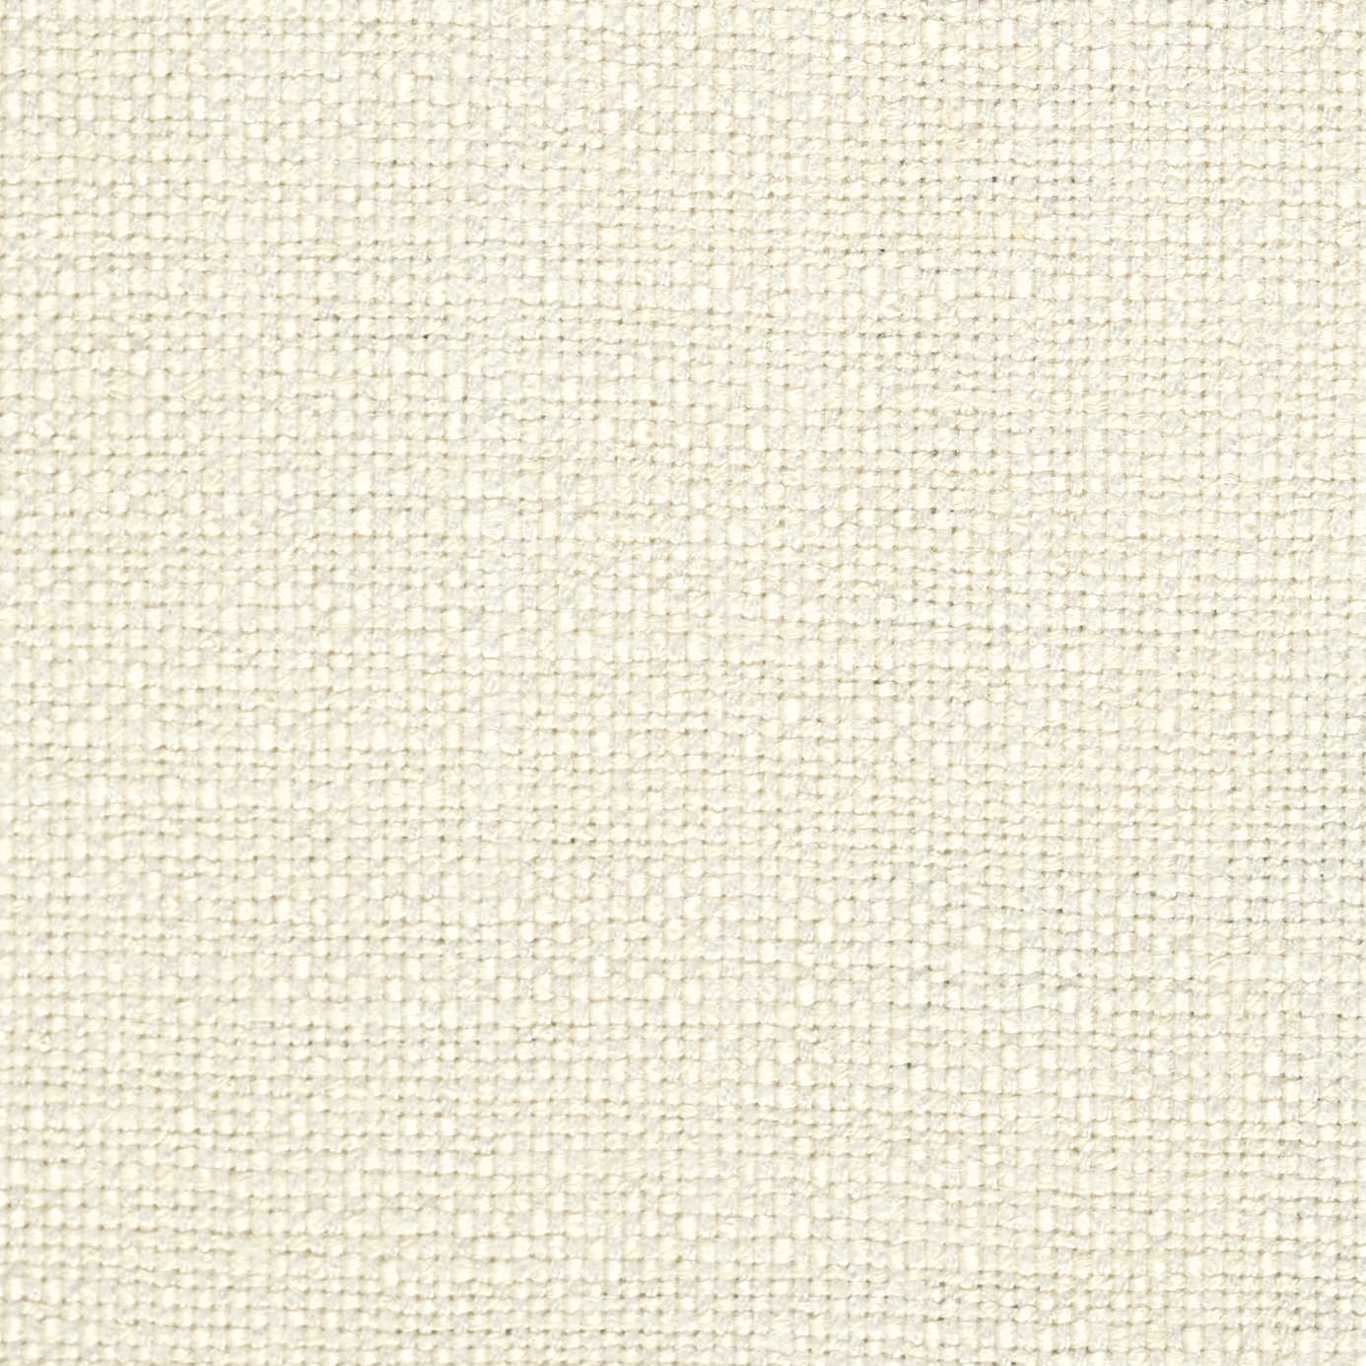 Fission White Cotton Fabric by HAR